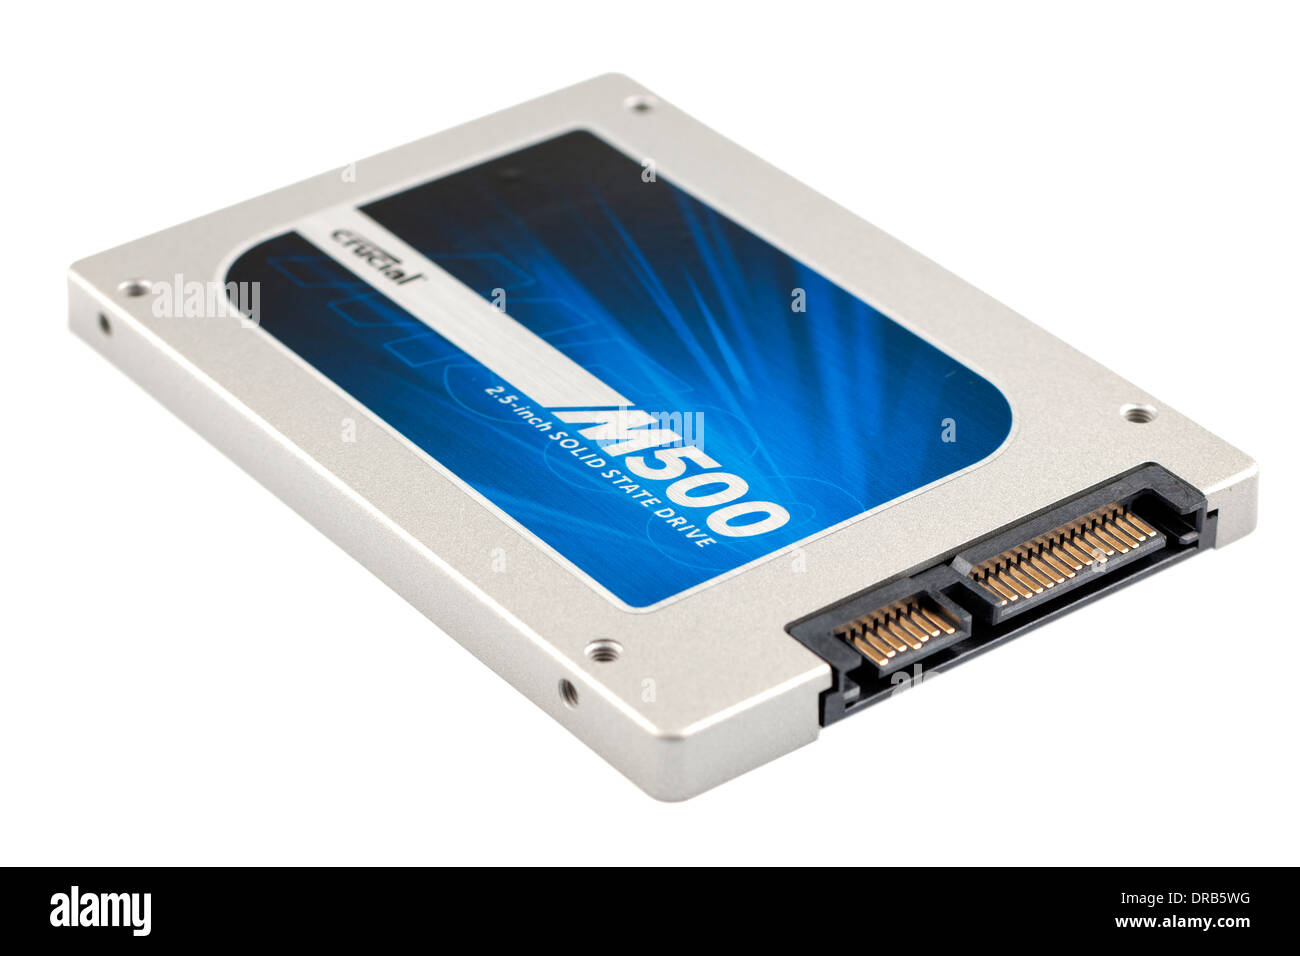 Crucial M500 2.5 inch 250 gb solid state drive sata connection Stock Photo  - Alamy